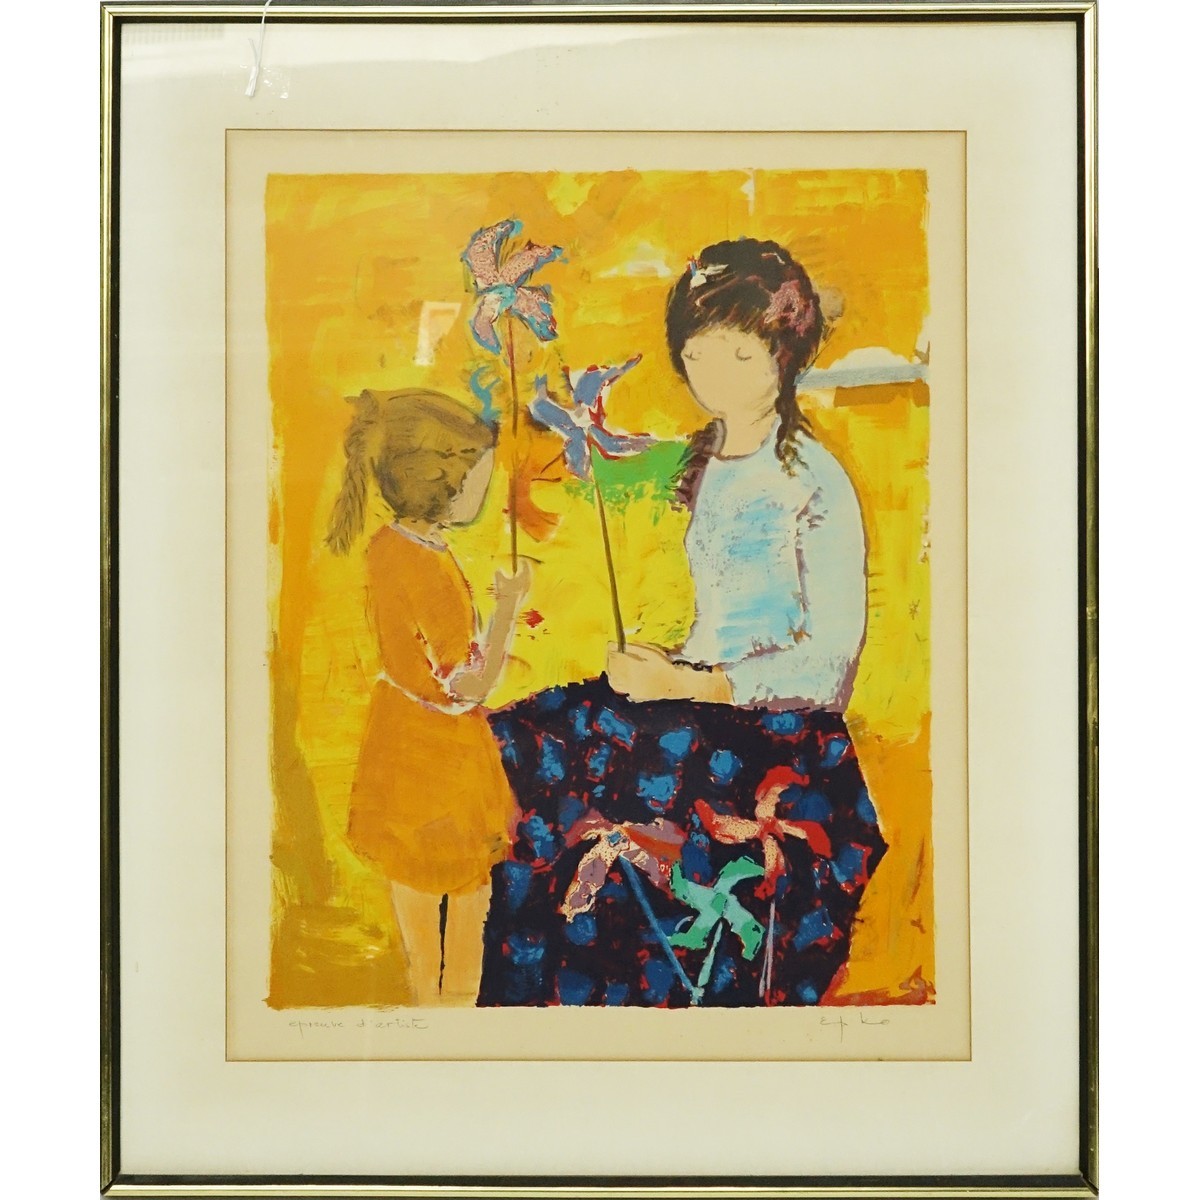 Willering Epko, French (born 1928) Color lithograph "Marchande de Jouets" Signed, "Epreuve D'Artiste" in pencil. Toning from age.